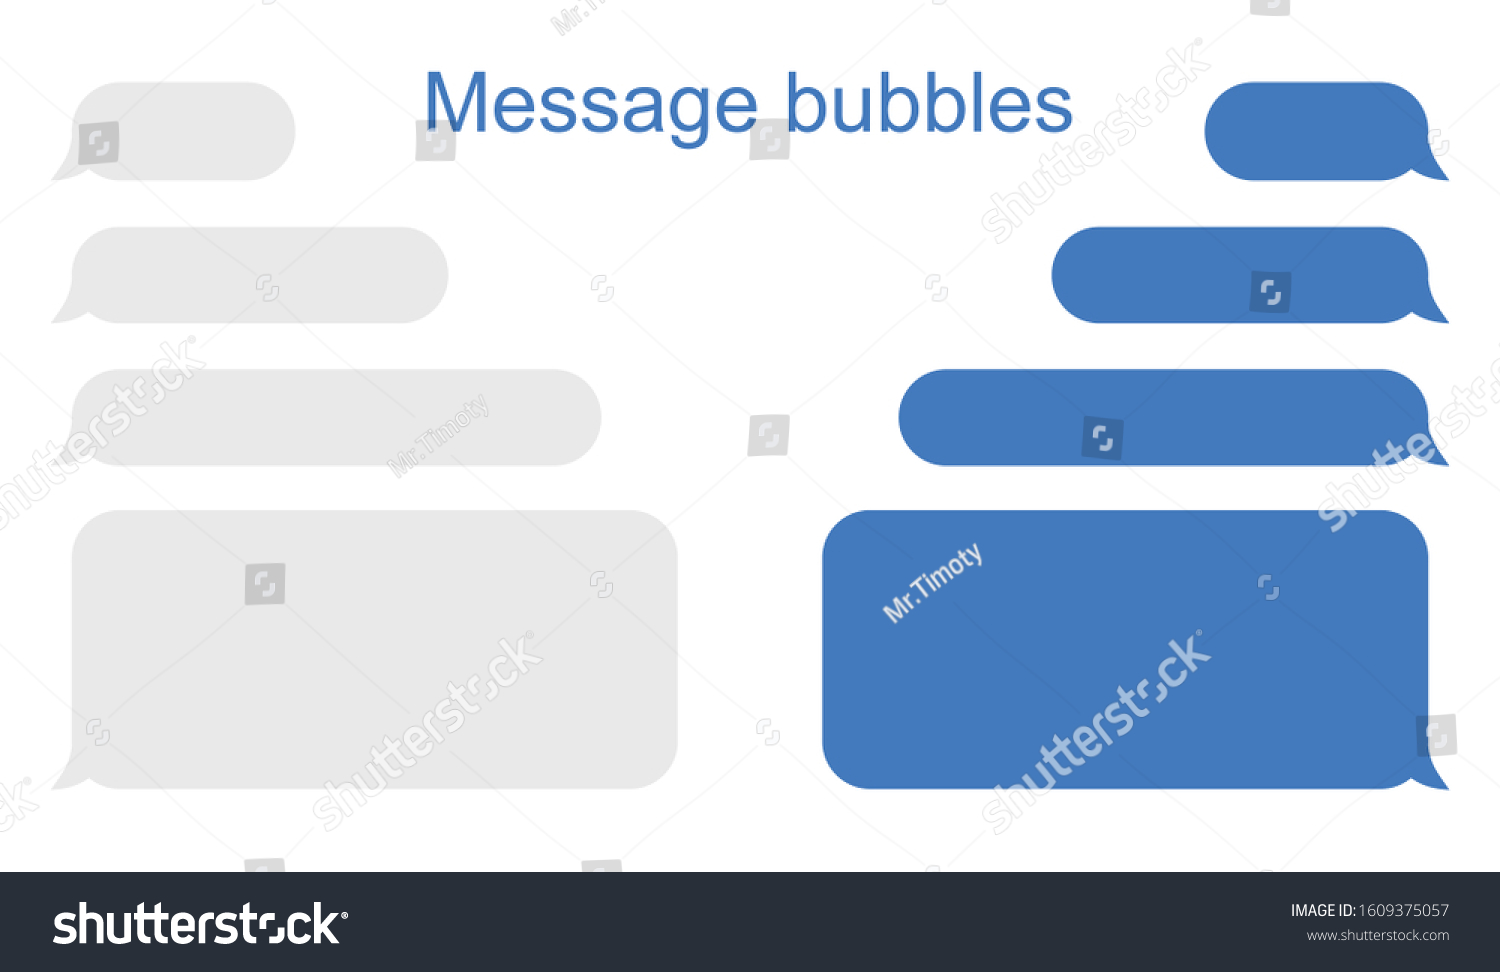 Message bubbles icons. Design for chat. Vector message tablog. Vectone graphics on a white background in a flat style for web sites and advertising big boards #1609375057